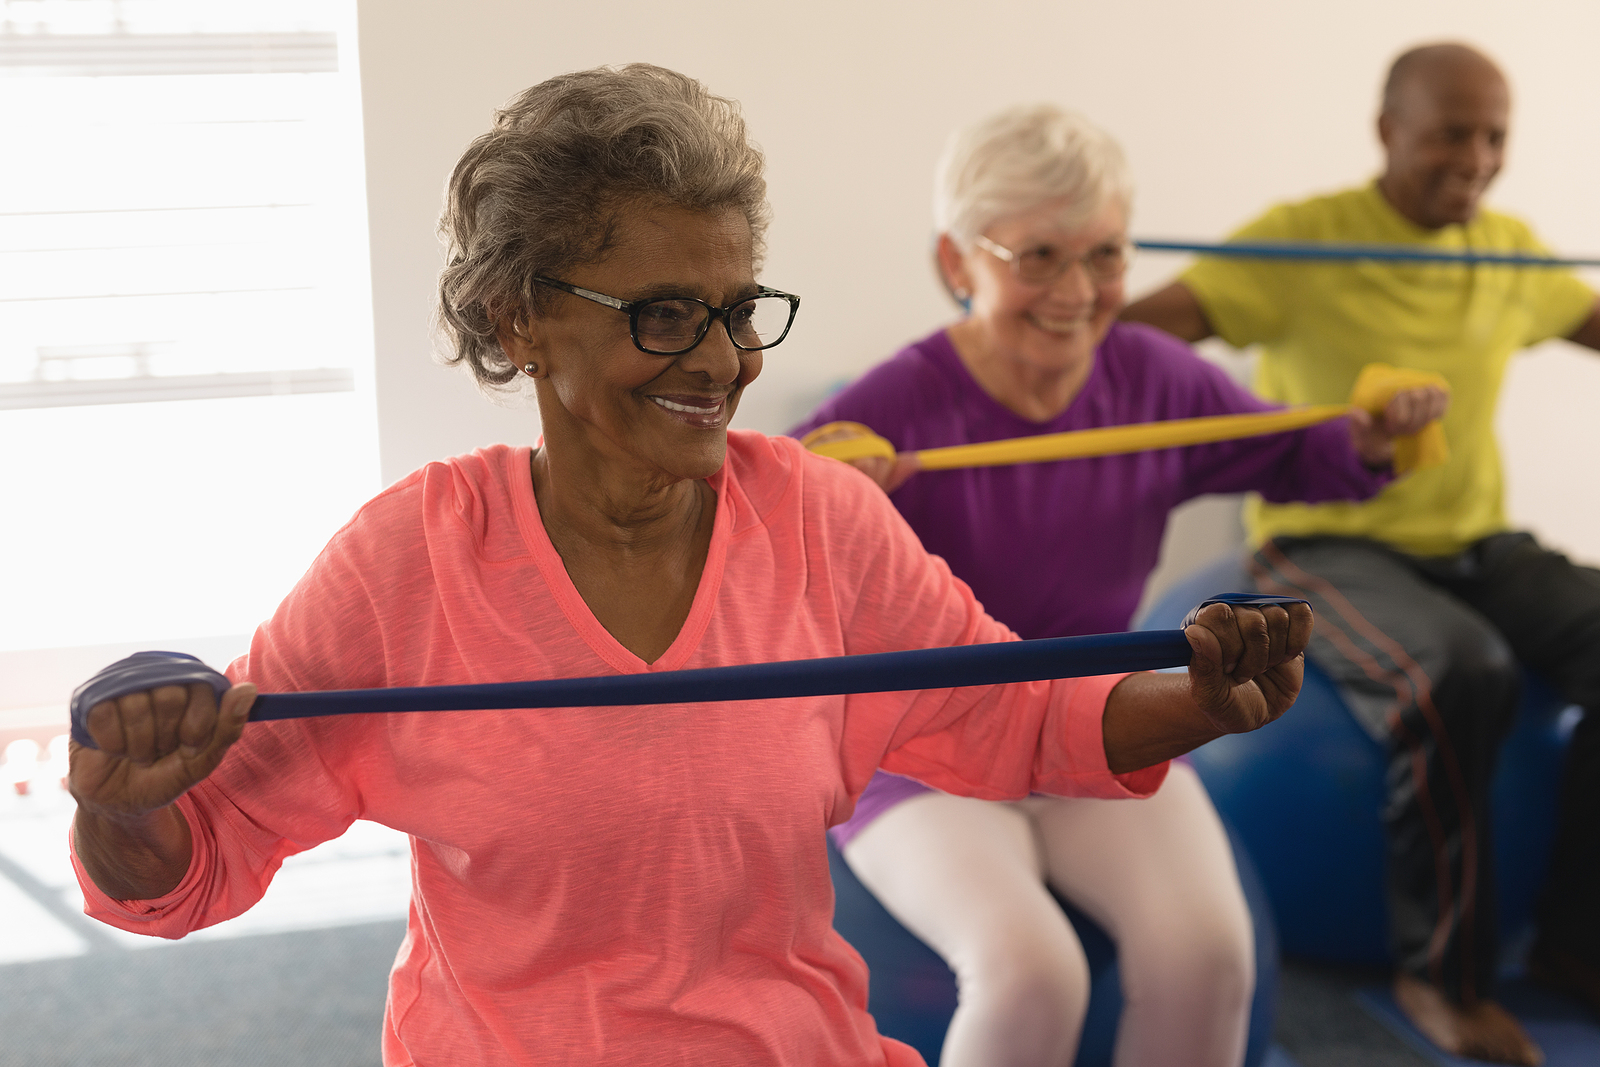 How Seniors Can Make Daily Exercise Fun